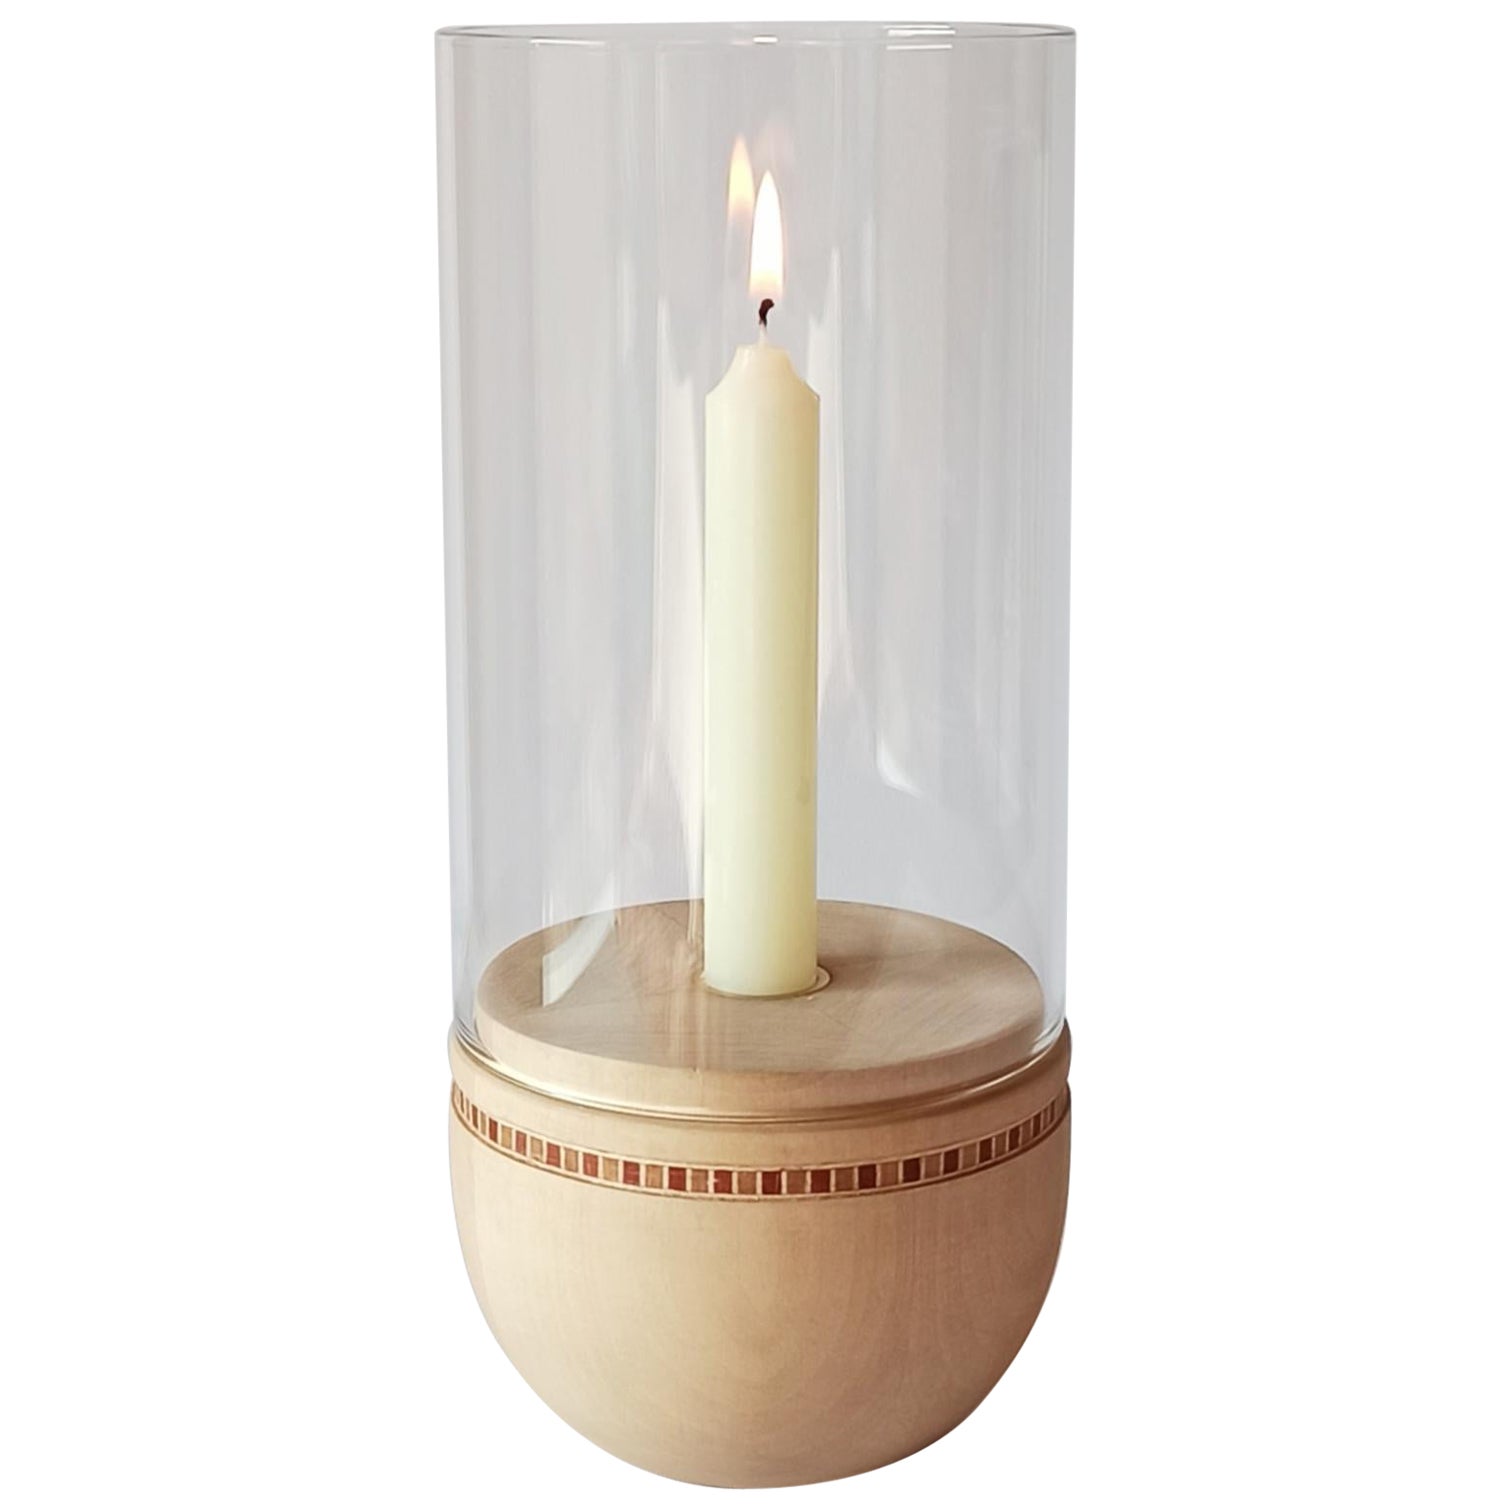 Lucille Wood and Firewallglass Candle Holder Minimal Style by Giordano Vigano